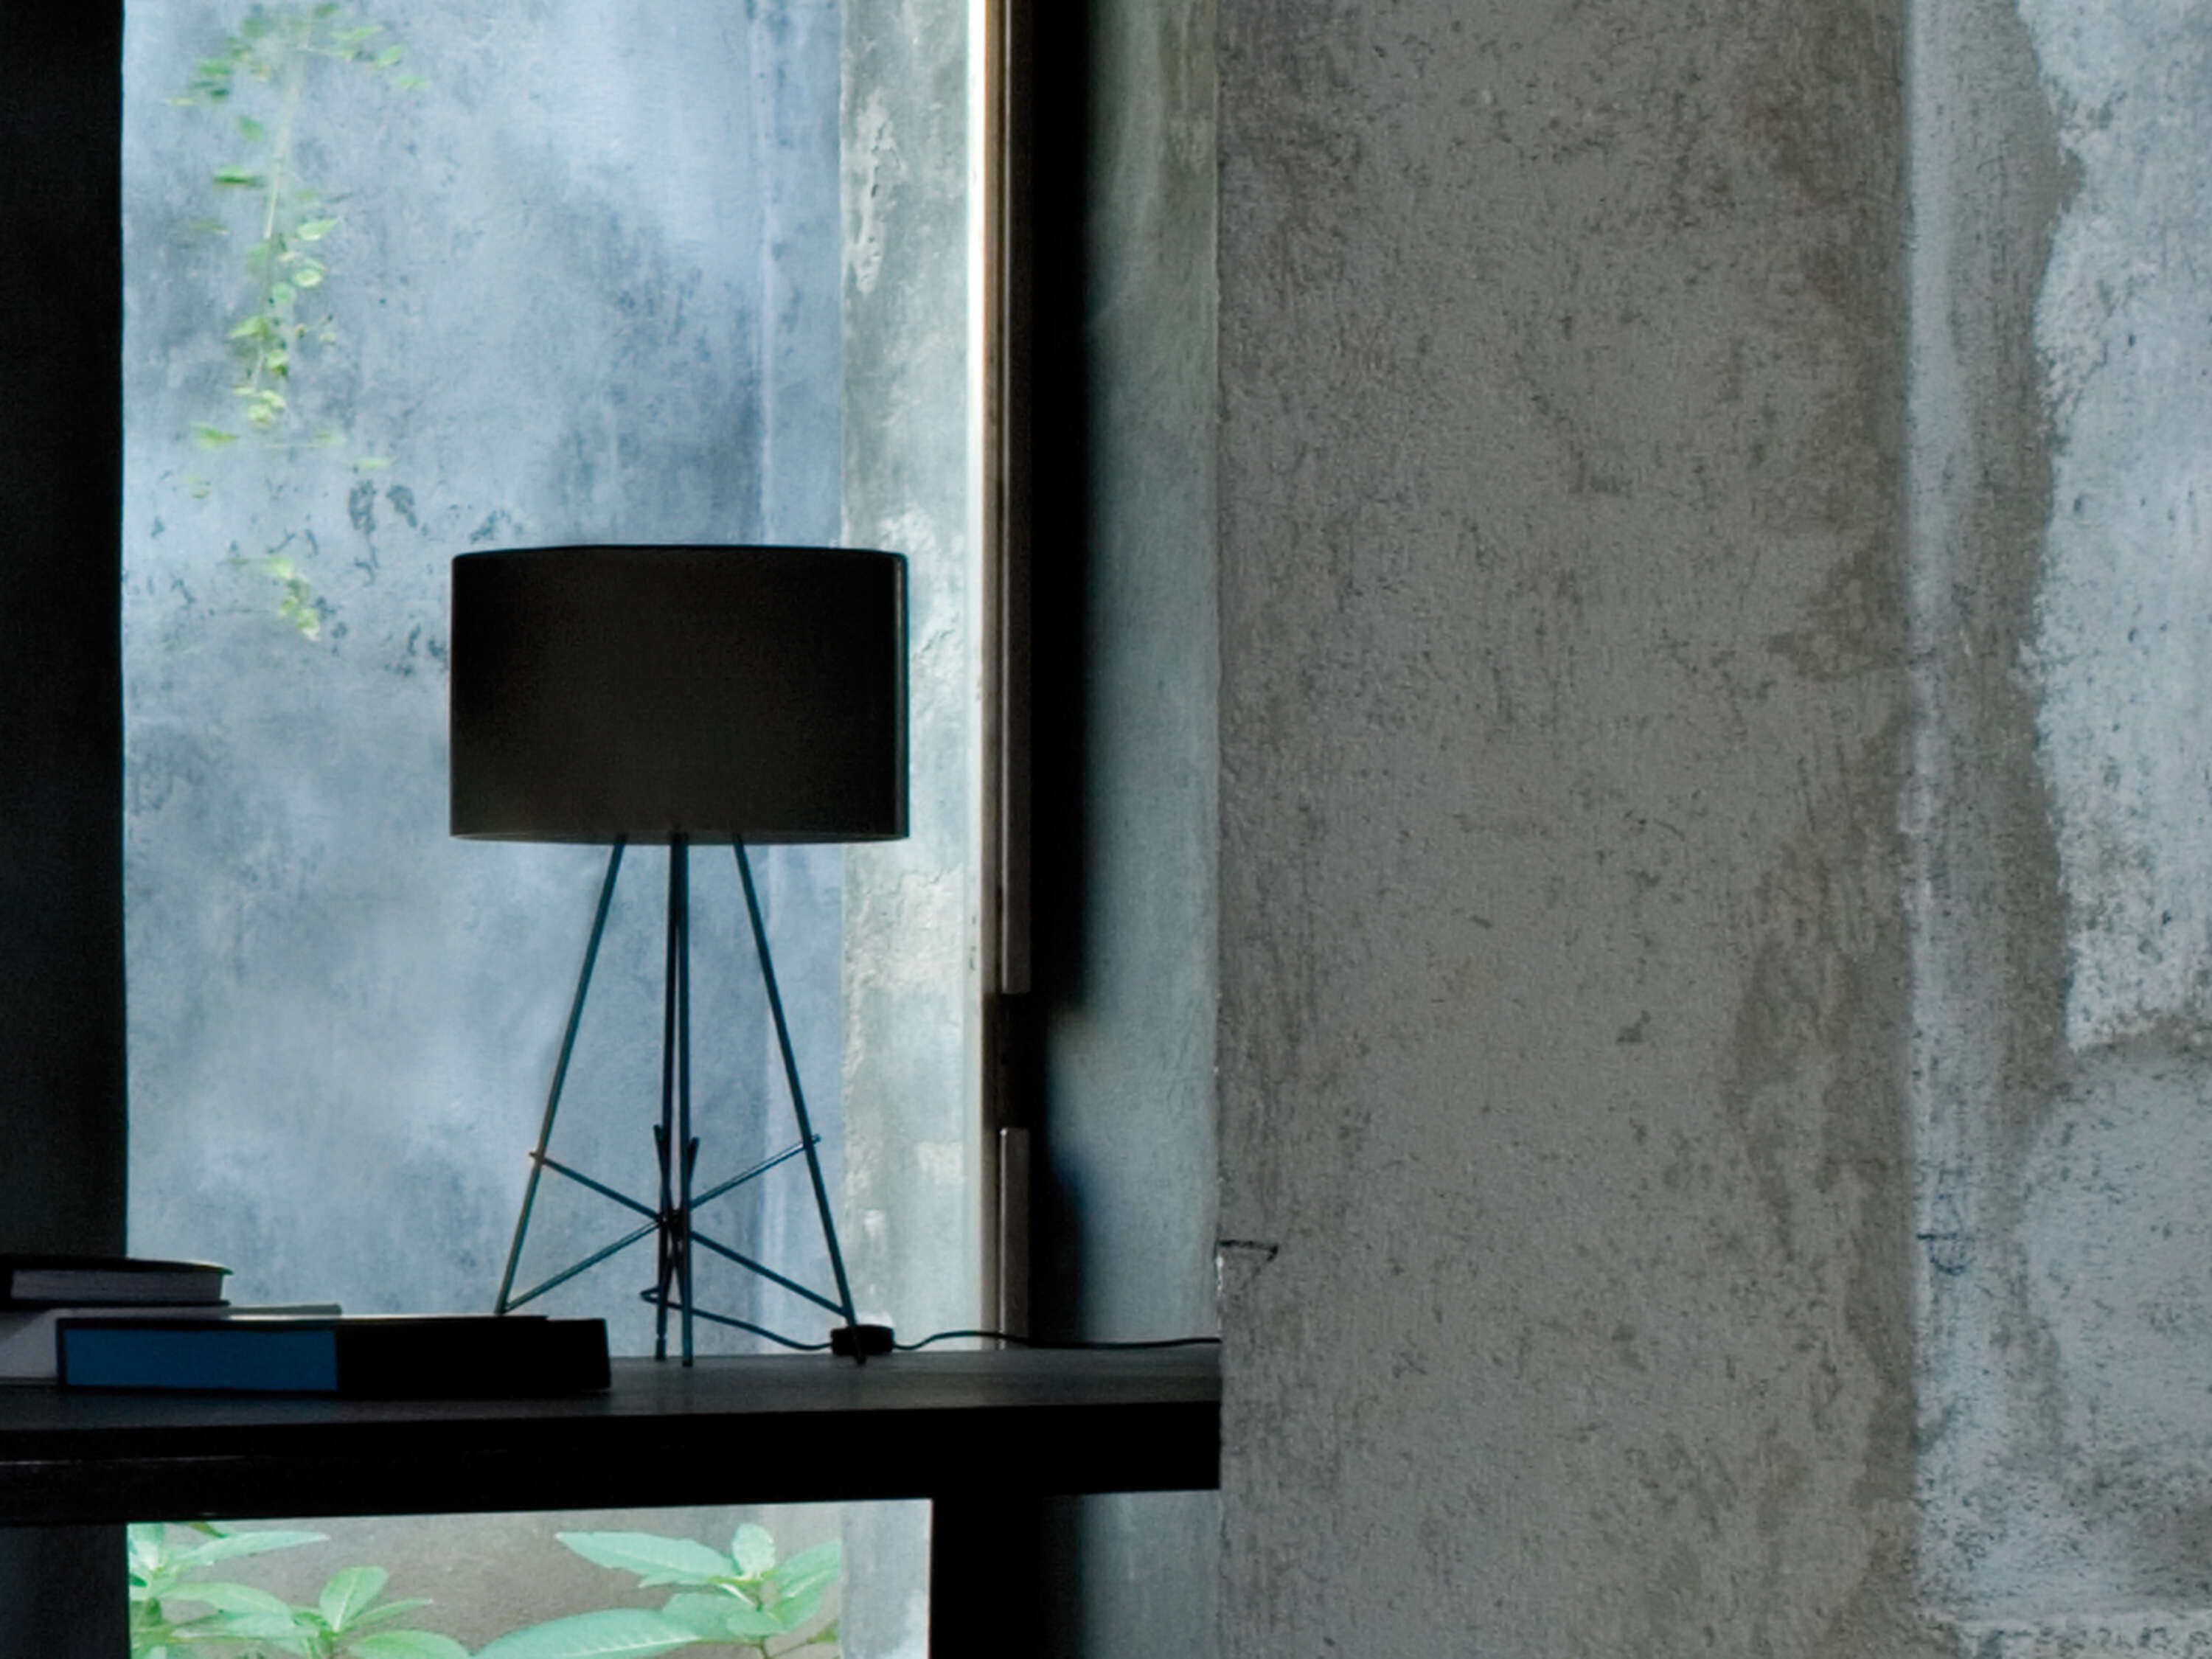 Table lamp RAY by Flos